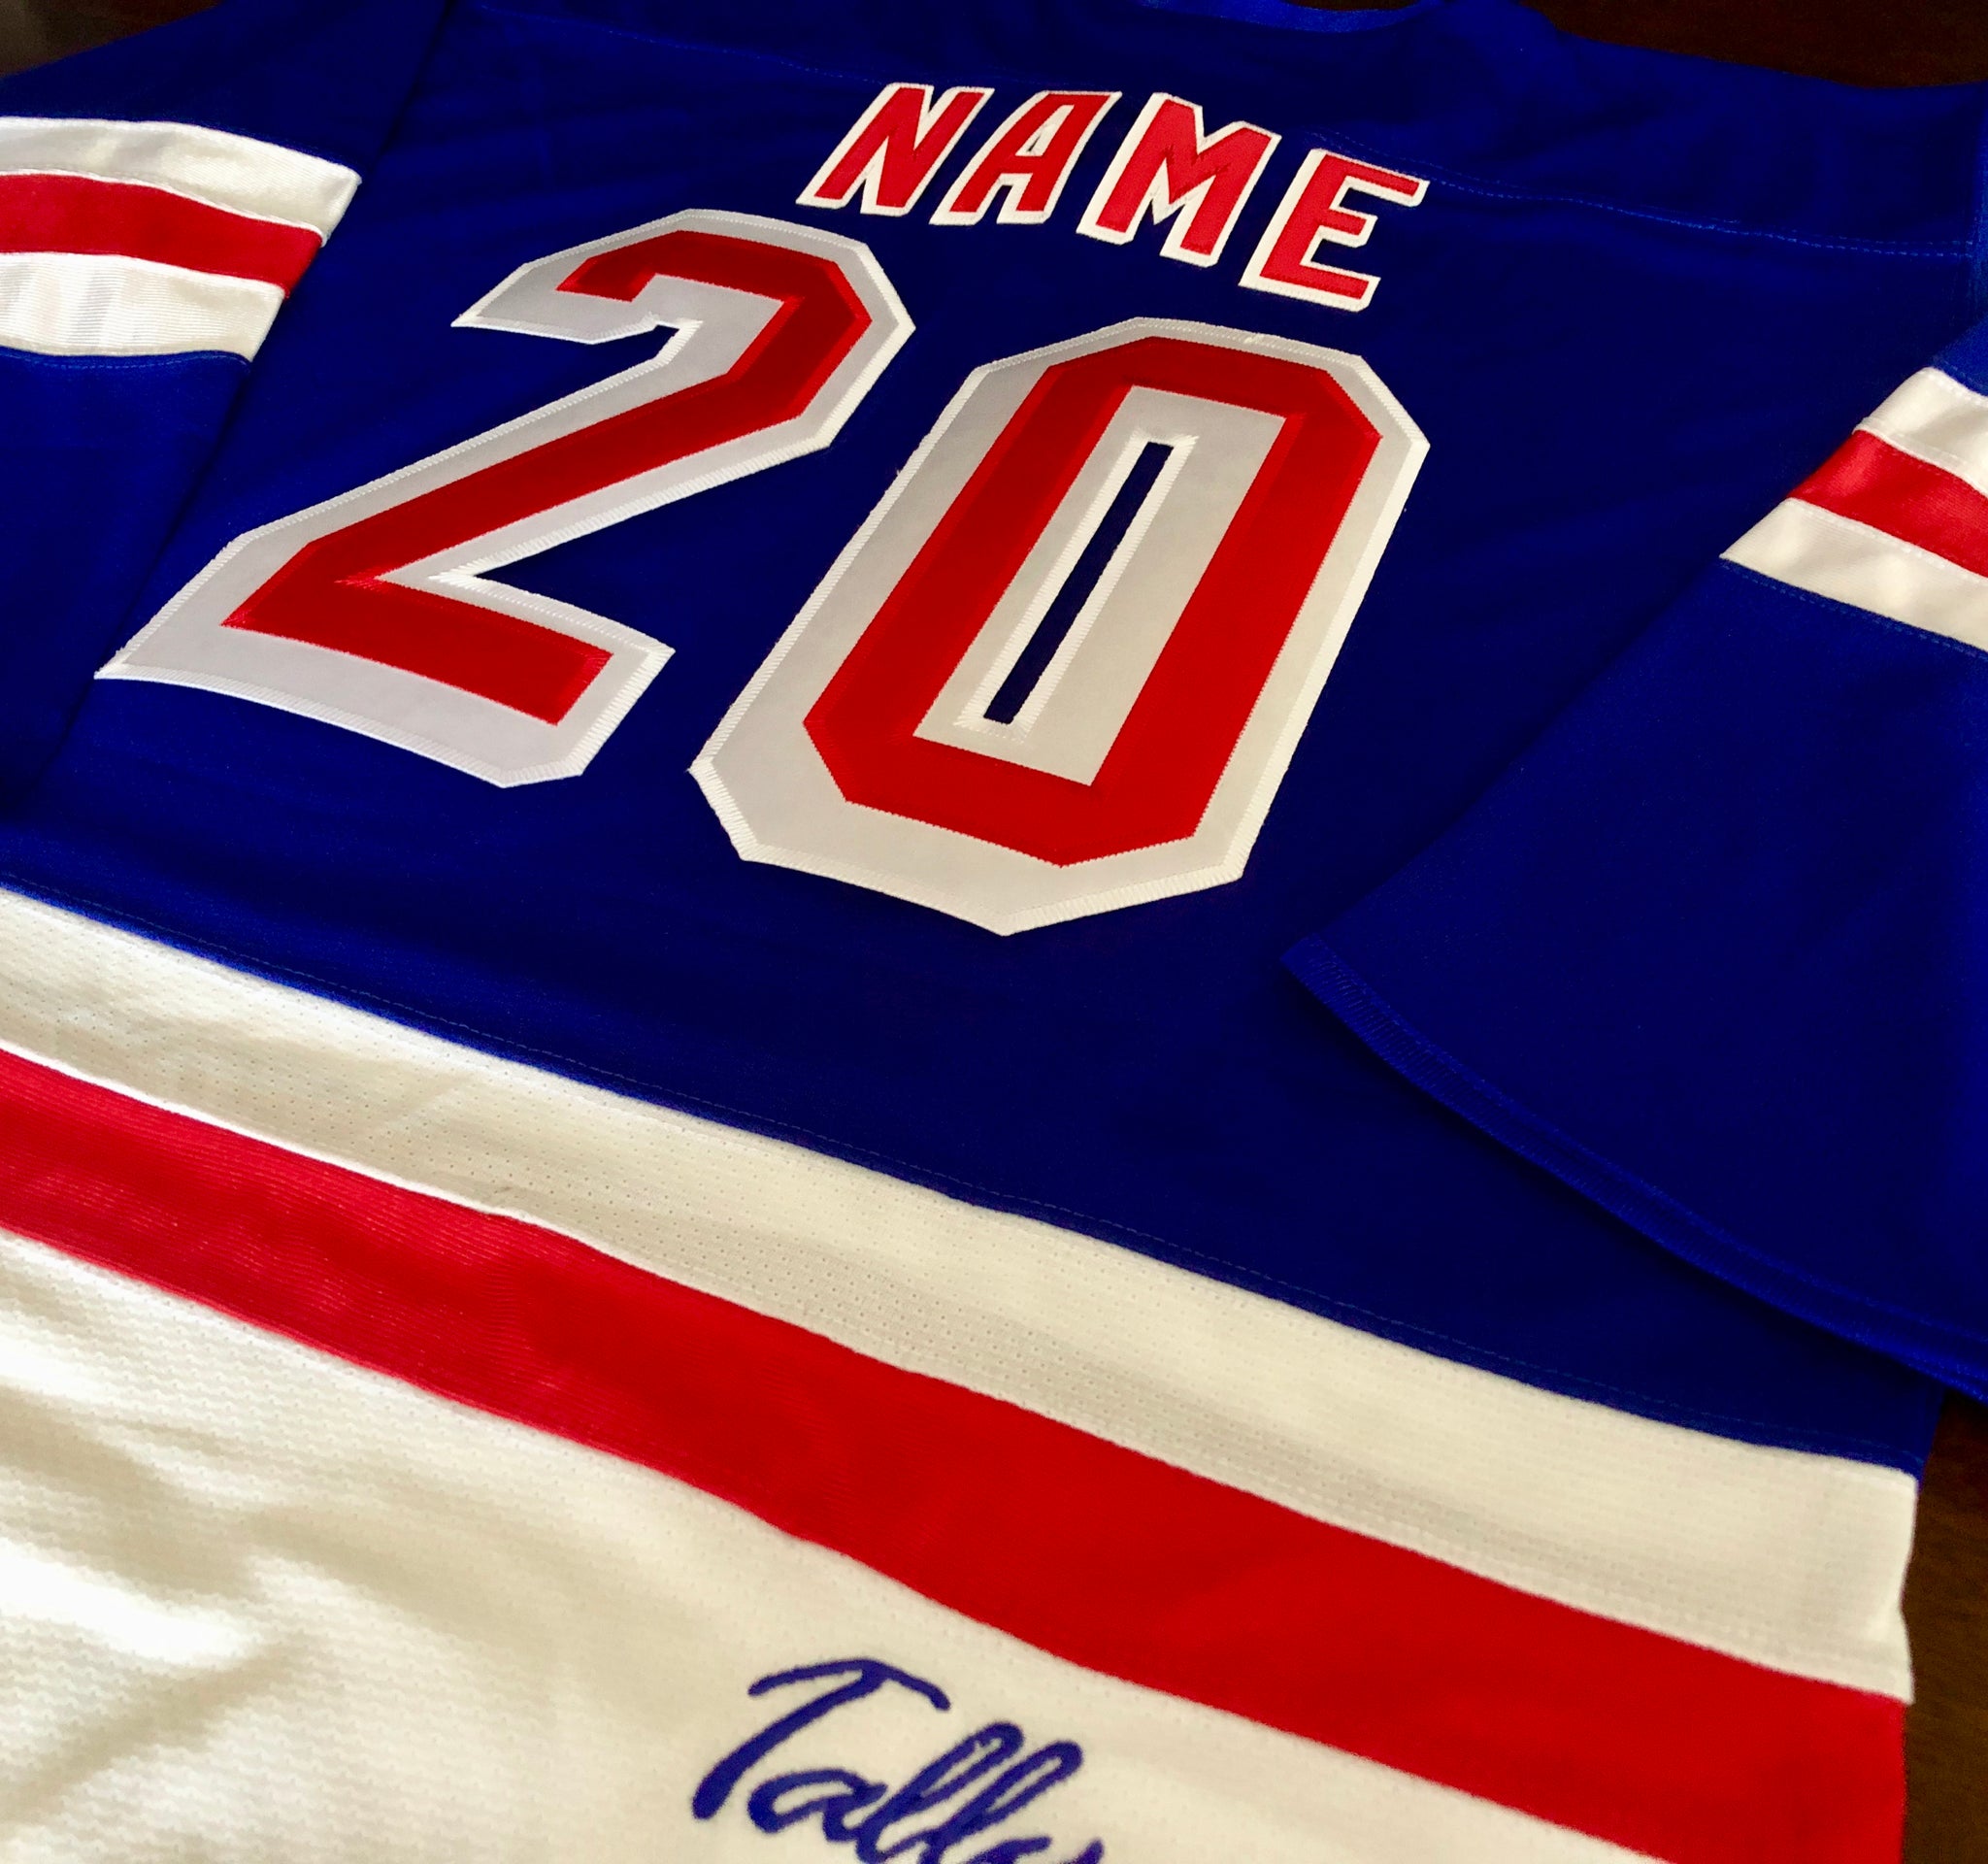 Custom Hockey Jerseys with Rangers in Twill Letters Adult XXL / (name and Number on Back and Sleeves) / Blue